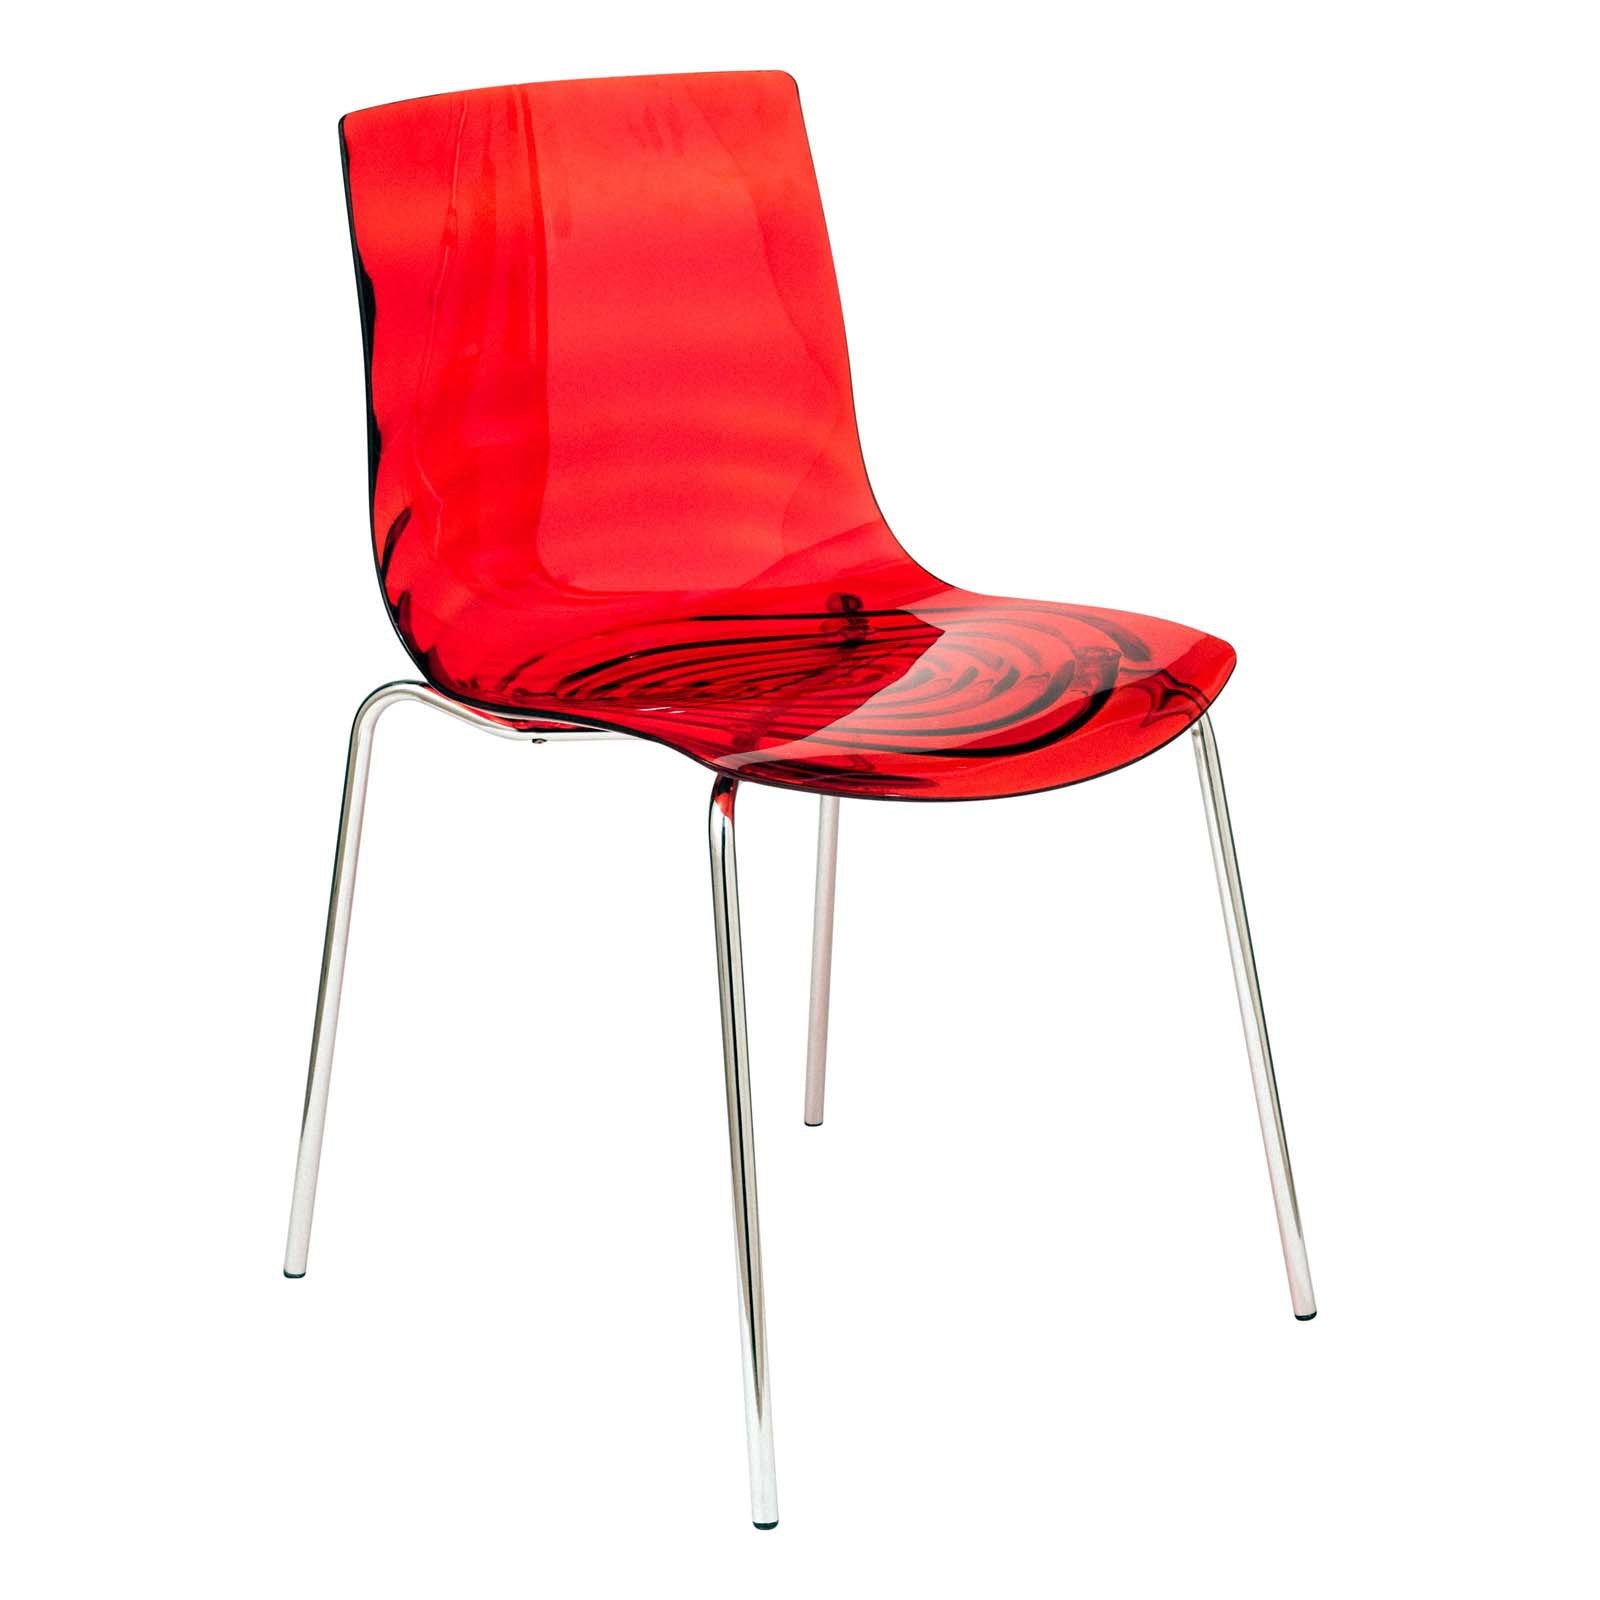 Asha Red Water-Drop Dining Chair - living-essentials